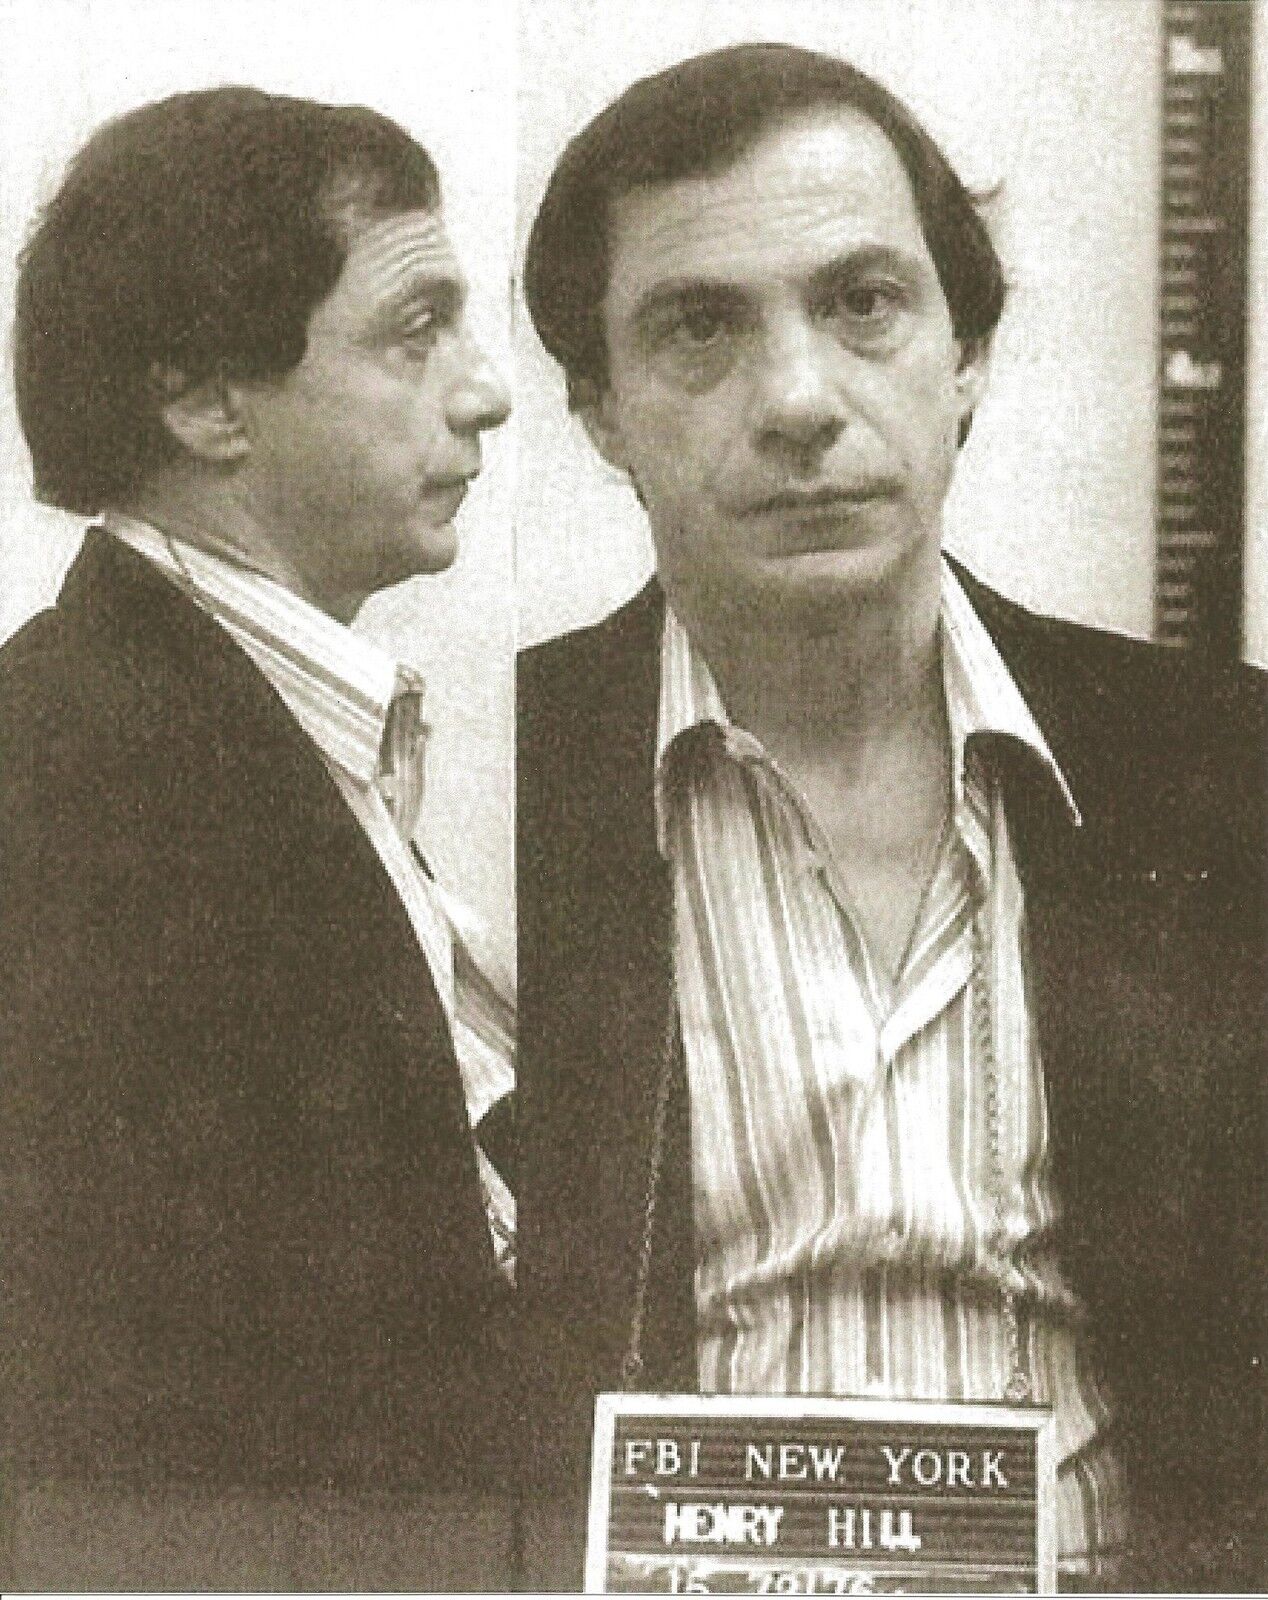 HENRY HILL 8X10 PHOTO MAFIA ORGANIZED CRIME MOBSTER MOB PICTURE